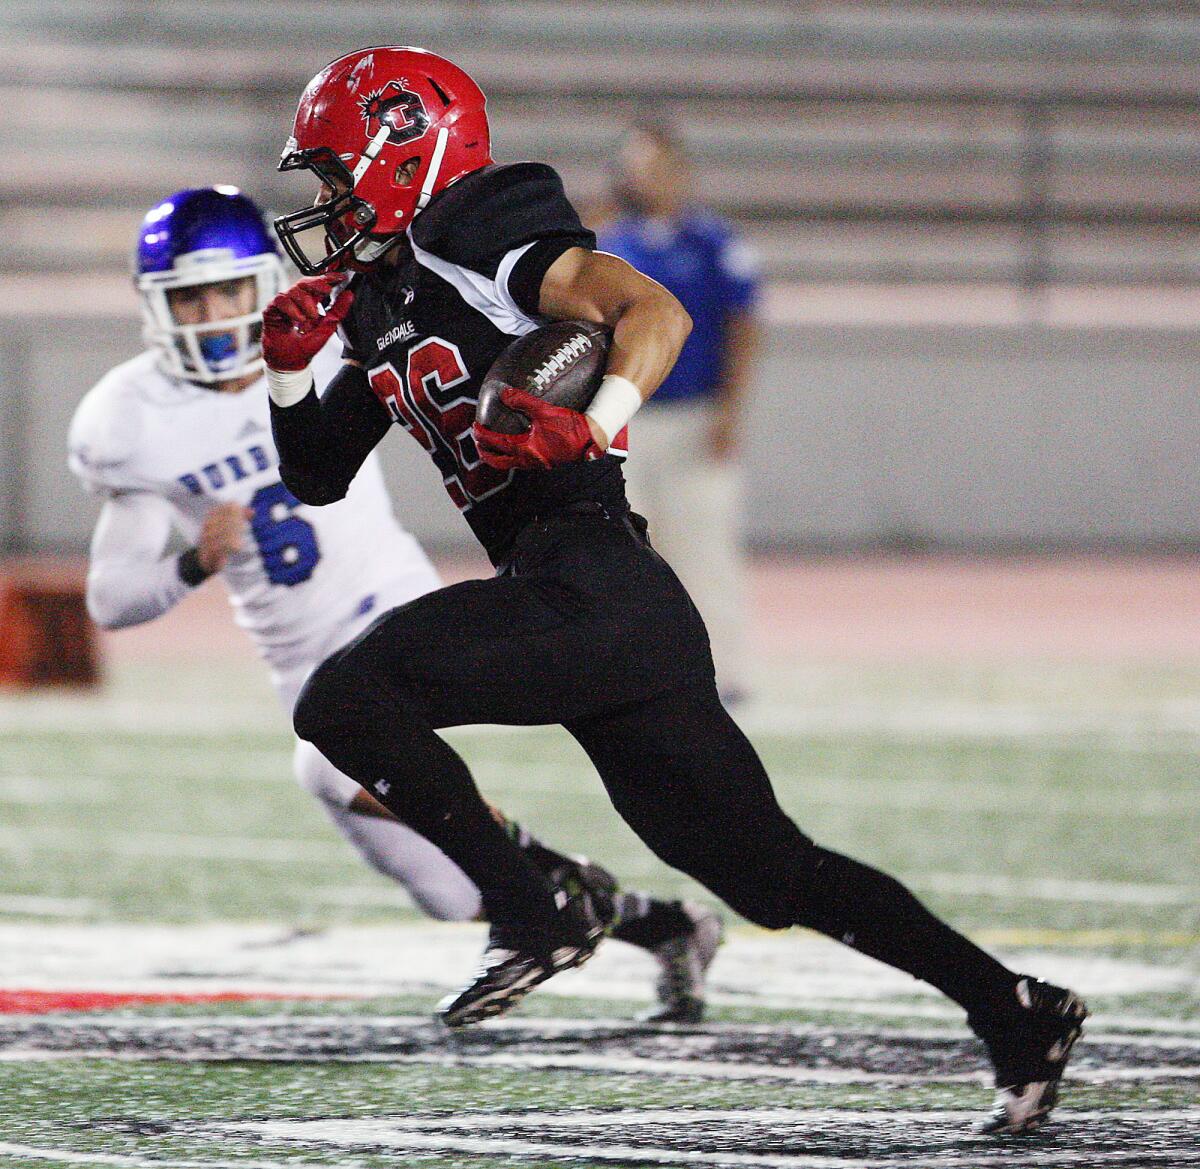 Glendale's Daniel Jung runs the ball past Burbank defender Nick Warren during a game on Thursday, October 16, 2014. Jung was recently named the team's most valuable player.